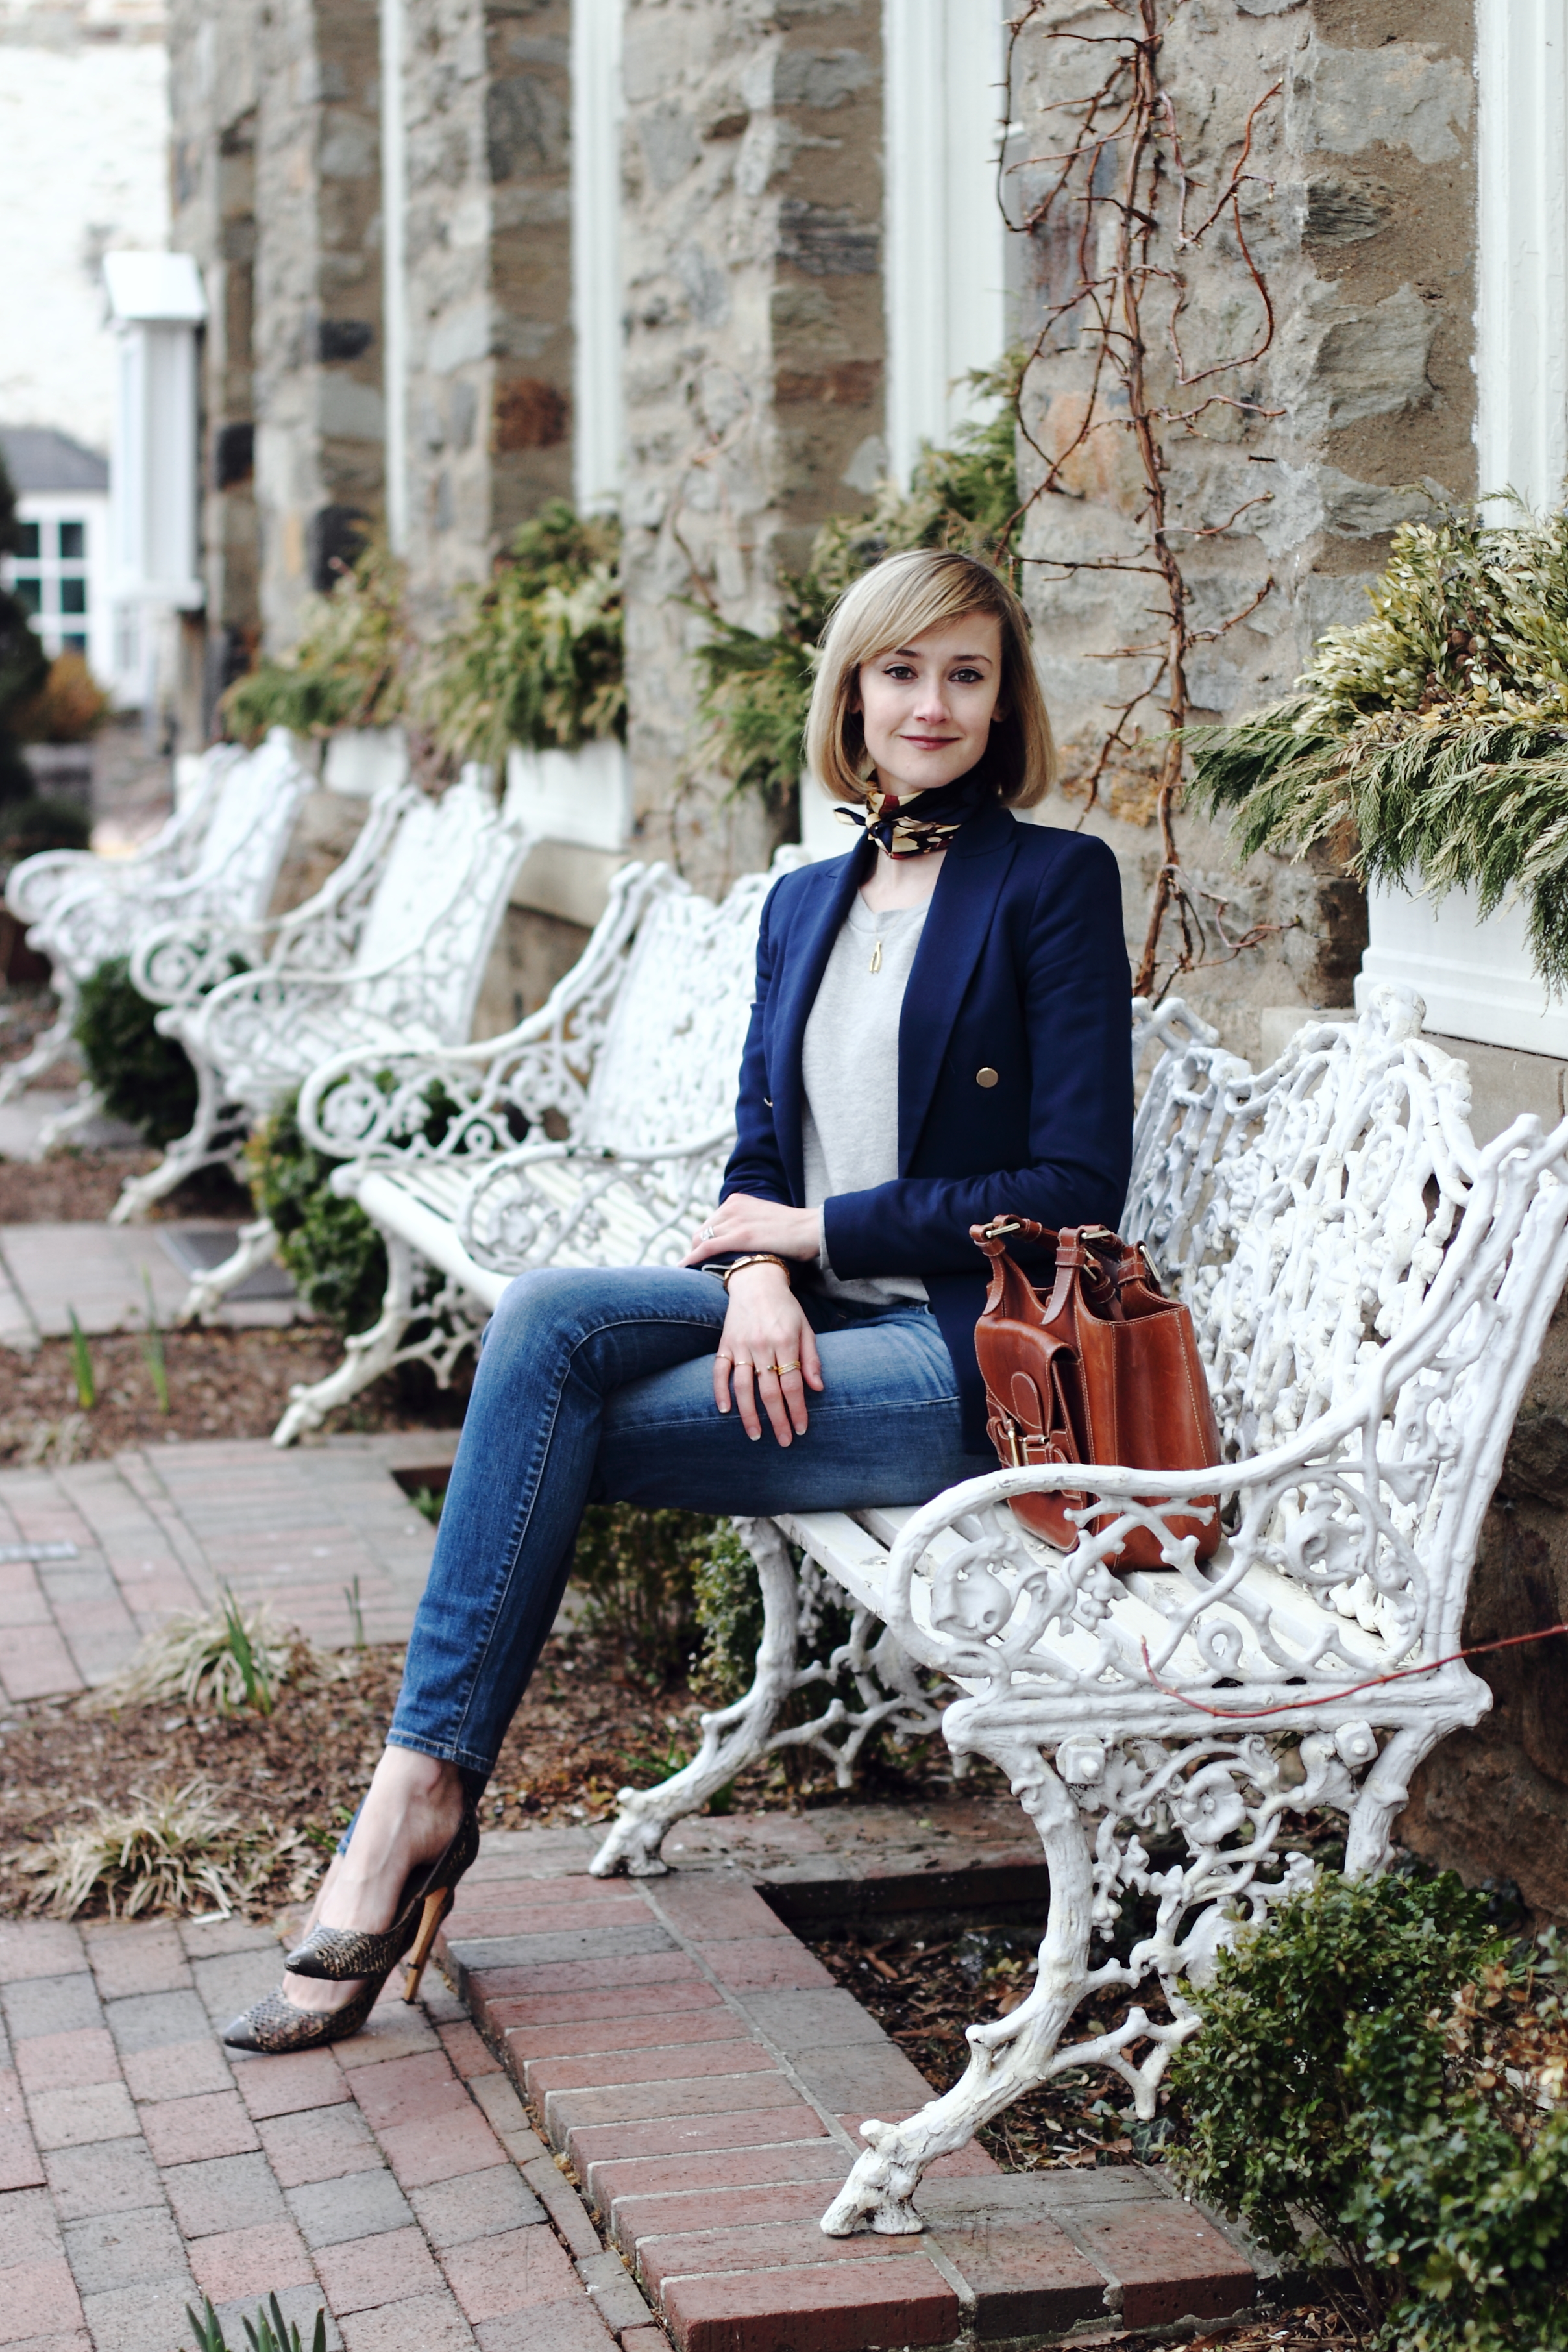 District of Chic: afternoon shopping in Middleburg, Virginia